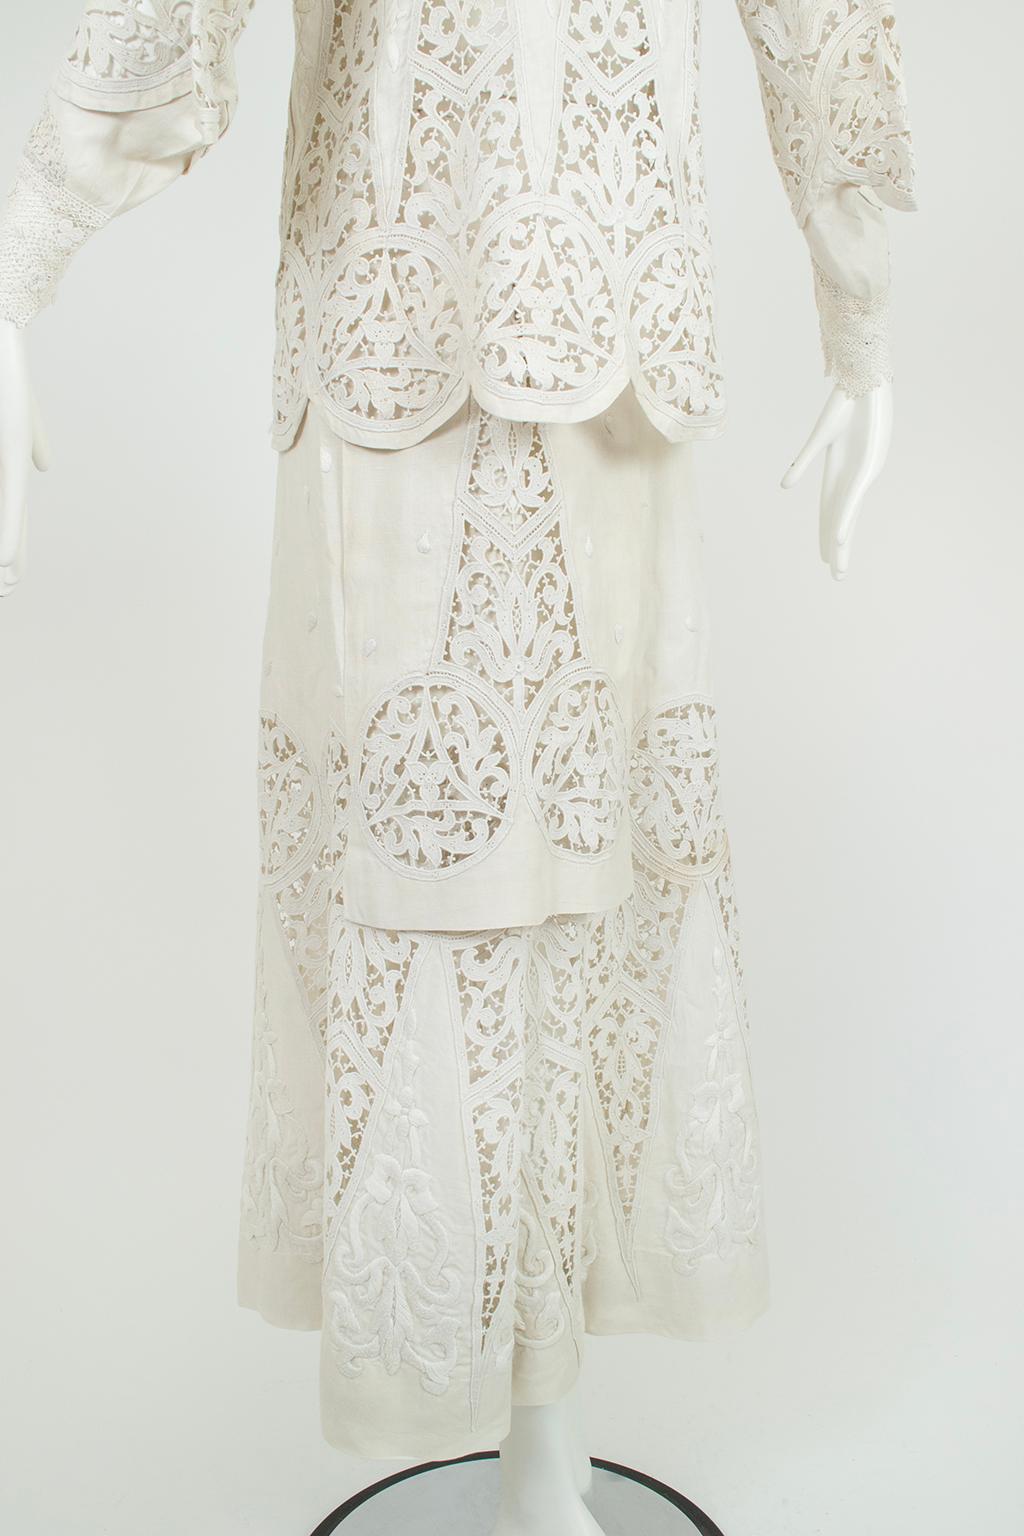 Edwardian White Irish Crochet and Cotton Walking or Wedding Suit – L, 1900s For Sale 8